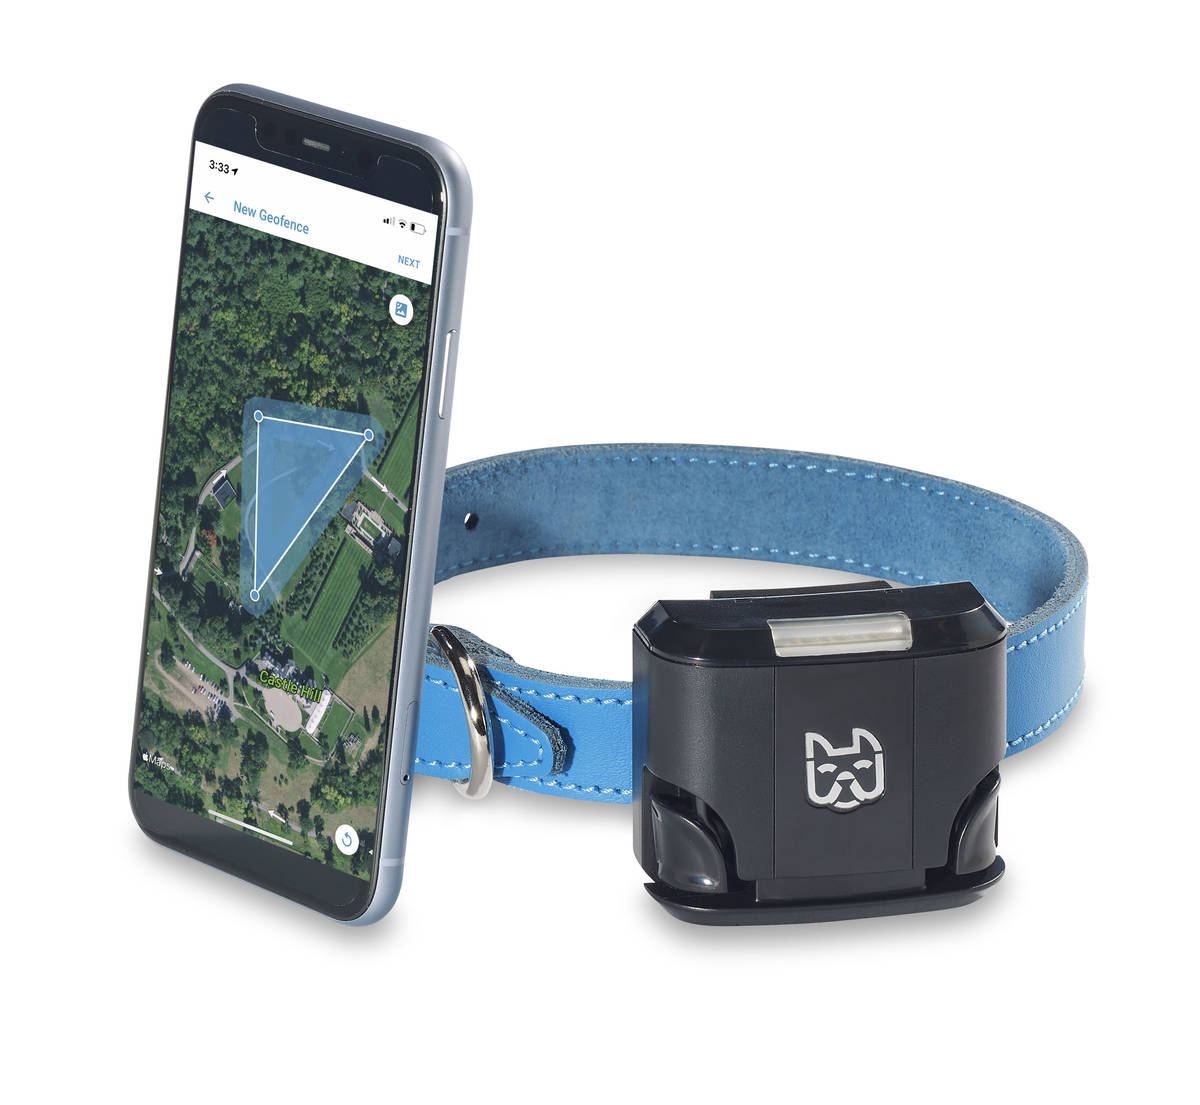 The Wagz Freedom Smart Dog Collar allows you to set boundaries with an app. (Wagz)